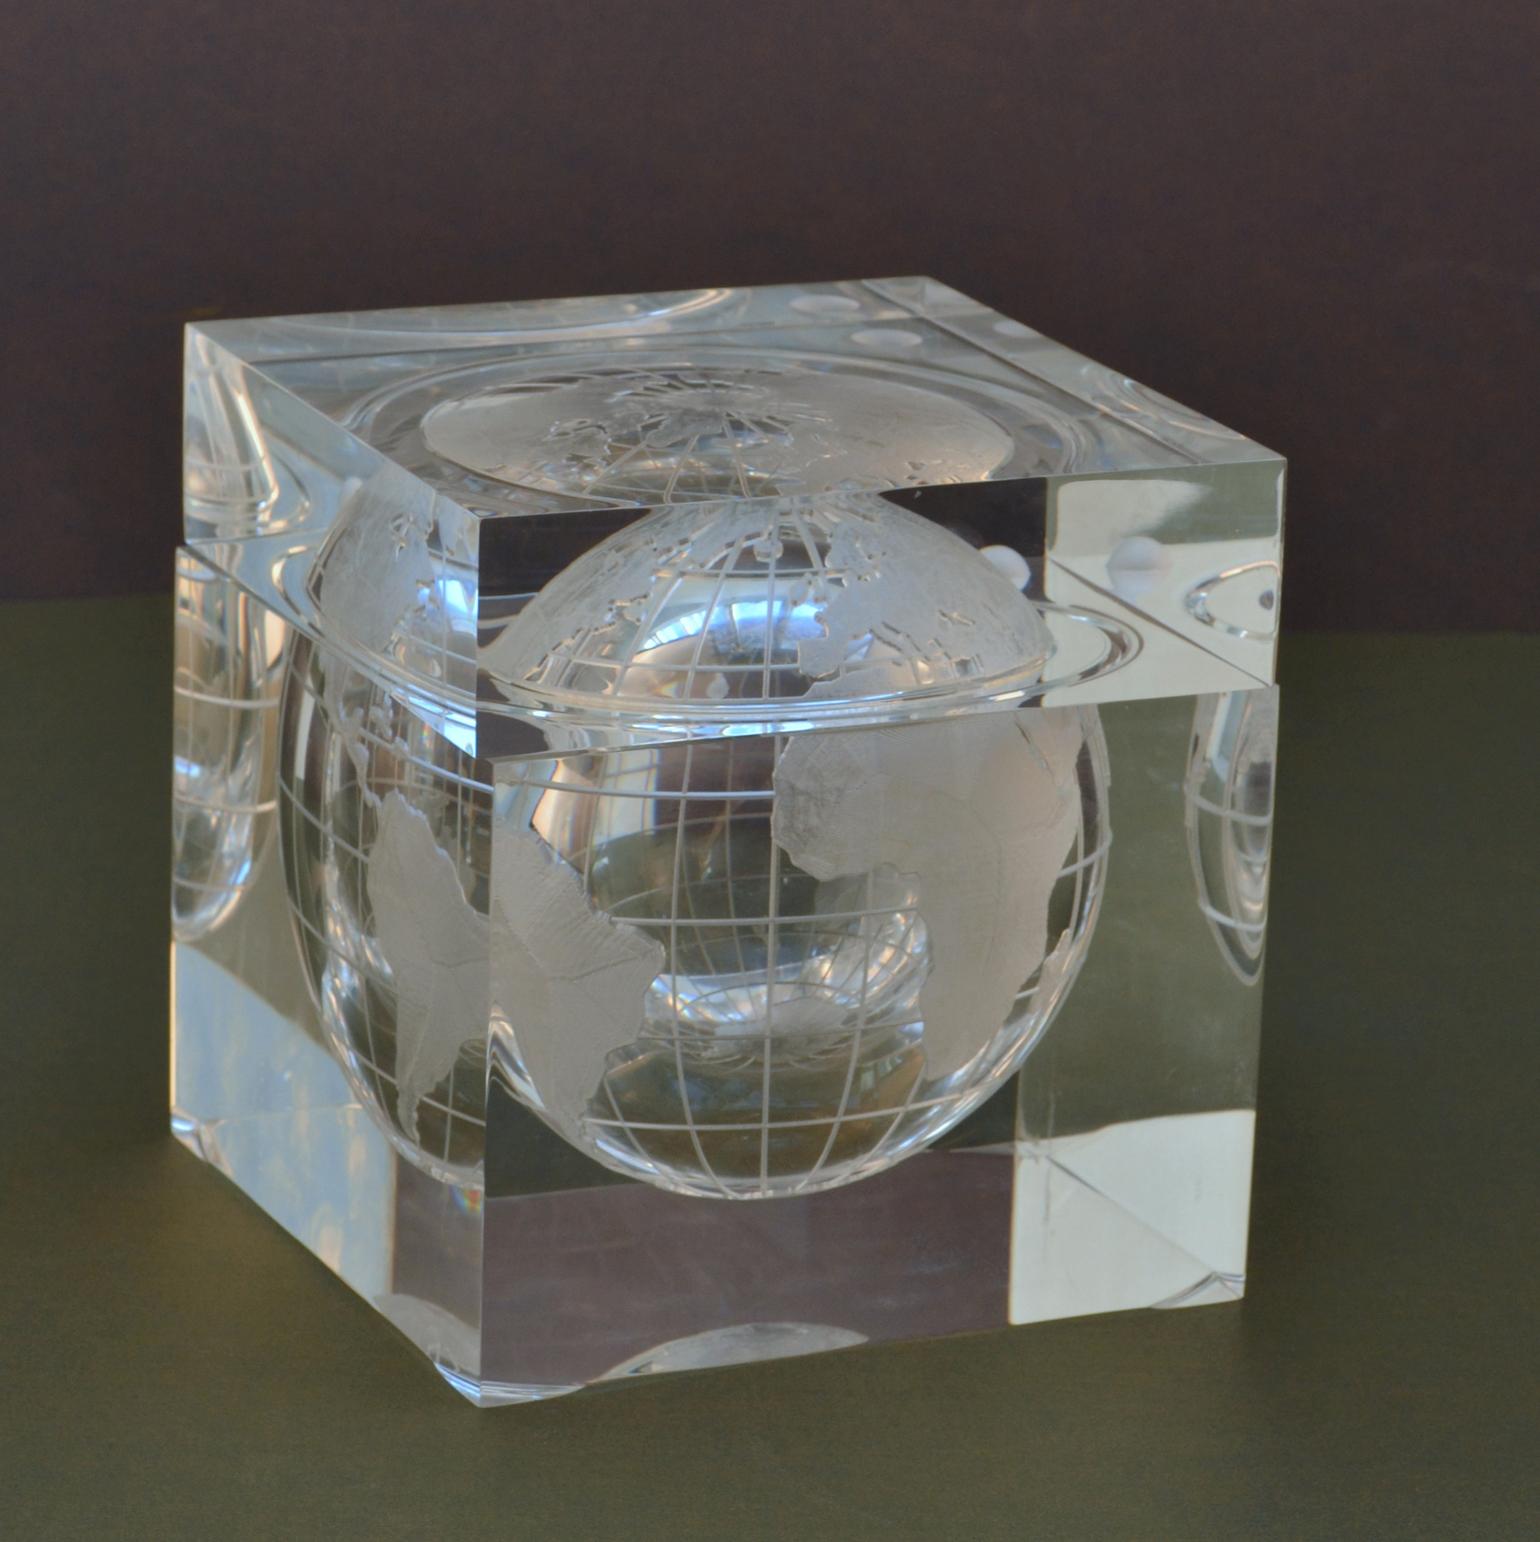 Lucite cube bar ware depicting the world captured in a cube of acrylic that resembles an ice cube. Frosted world map of continents and orbiting moon. Suspended world globe ice bucket is designed and created by Alessandro Albrizzi, Italy 1960's. The